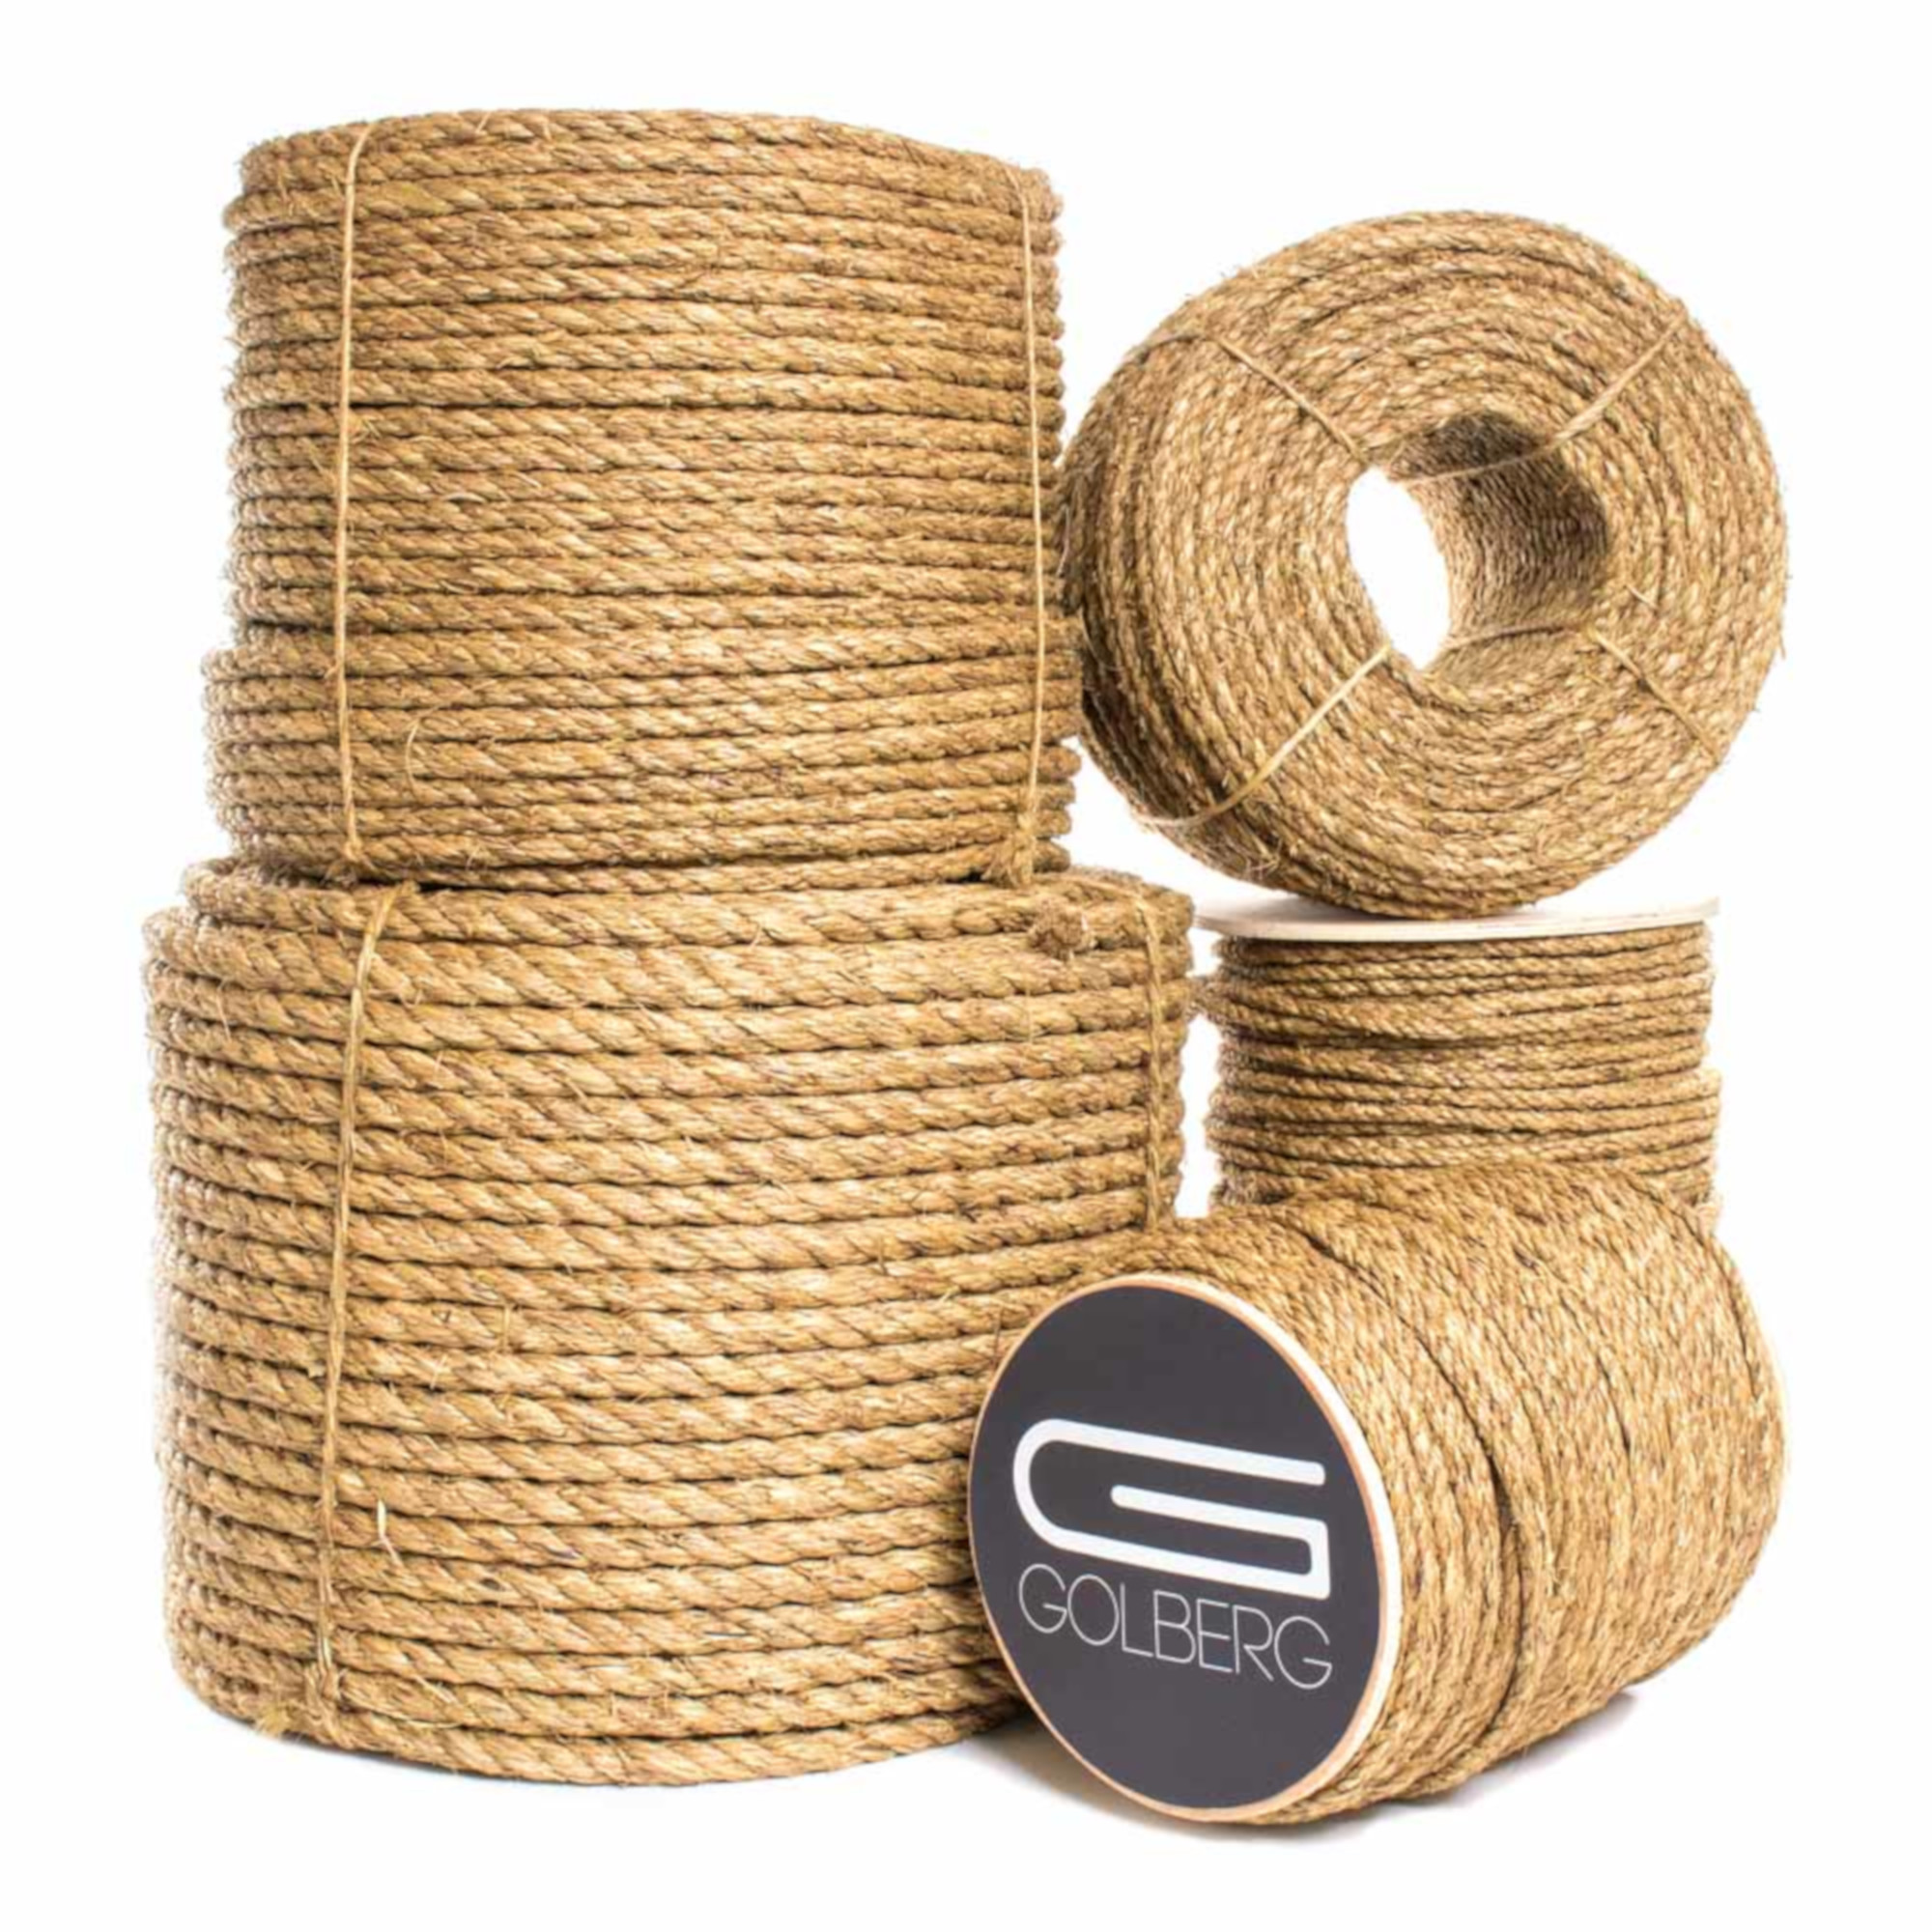 GOLBERG Manila Rope - Heavy Duty 3 Strand Natural Fiber - 1/4 inch, 5/16 inch, 3/8 inch, 1/2 inch, 5/8 inch, 3/4 inch, 1 inch, 2 inch - Available in Different Lengths - image 1 of 5